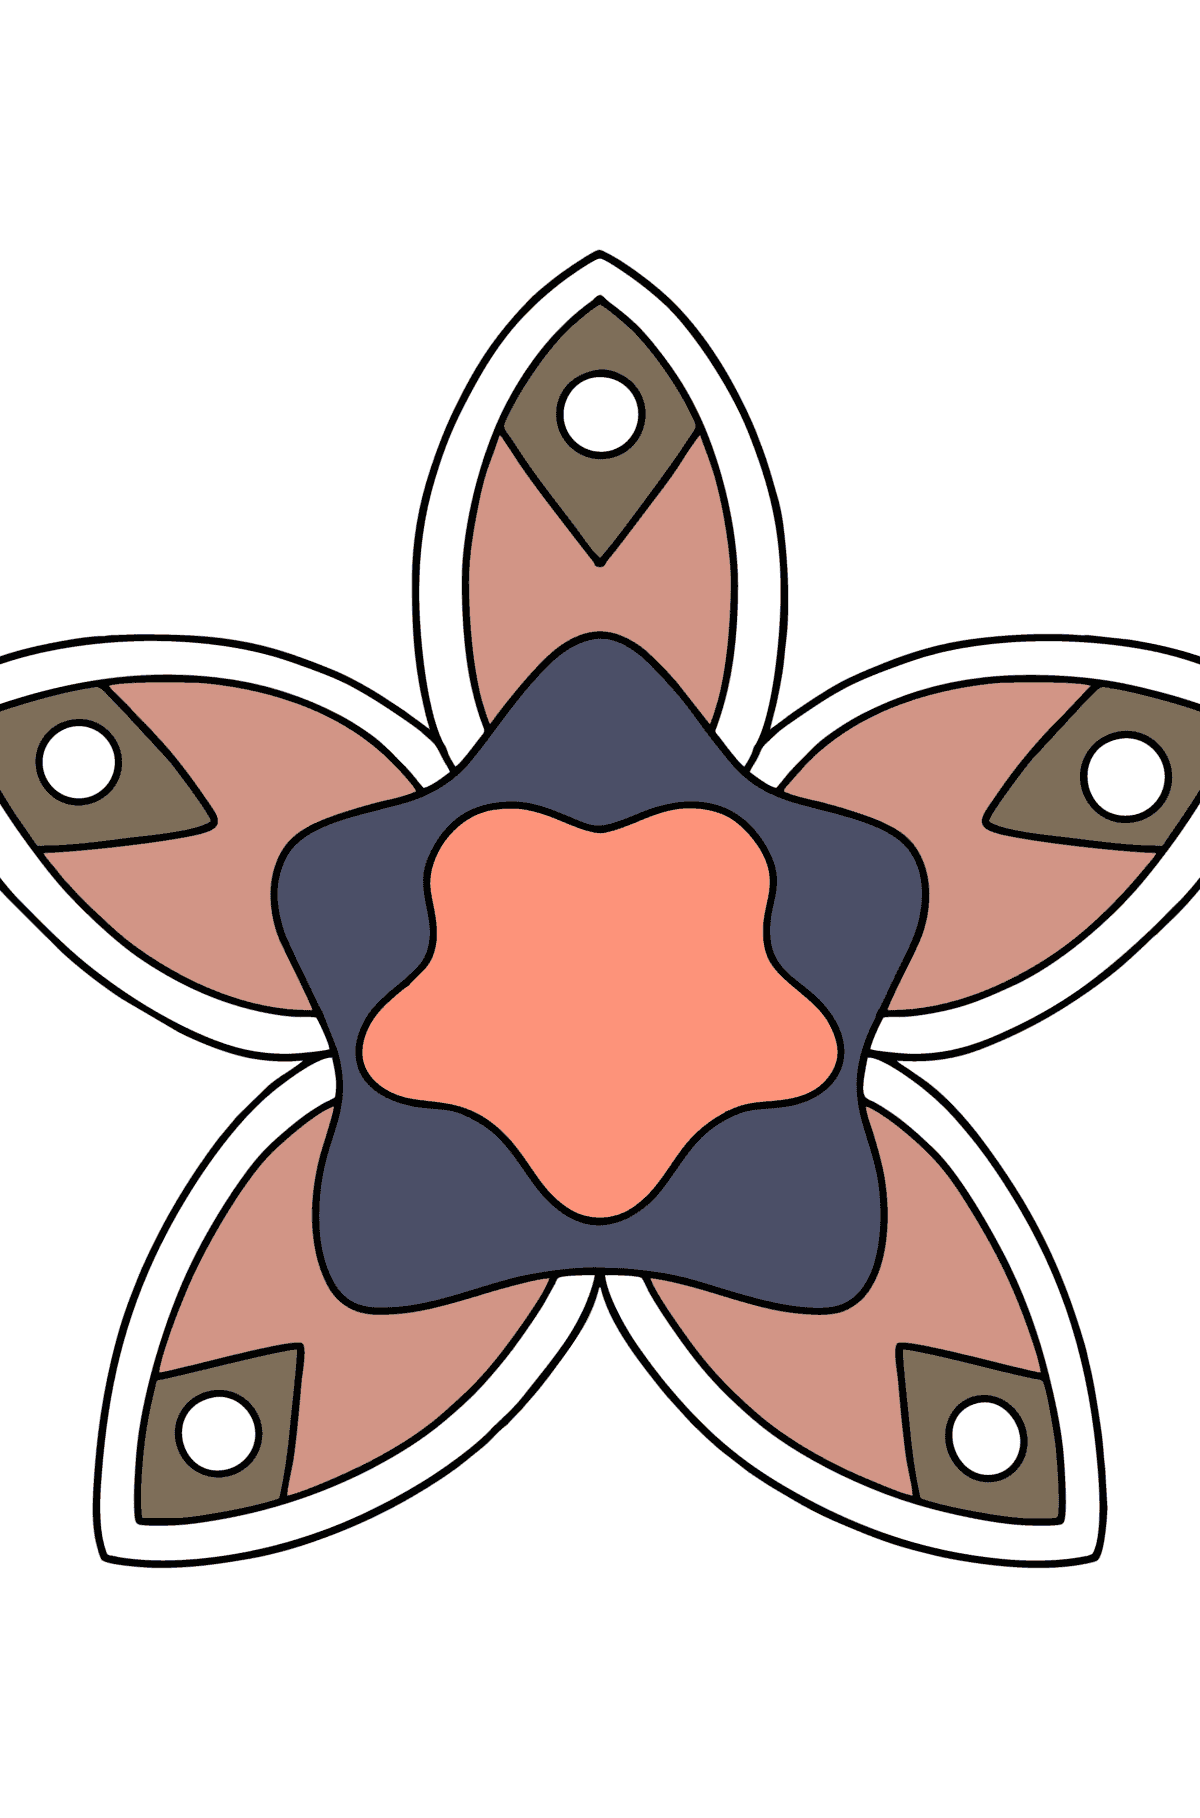 Simple Flower Anti stress coloring page - Coloring Pages for Kids